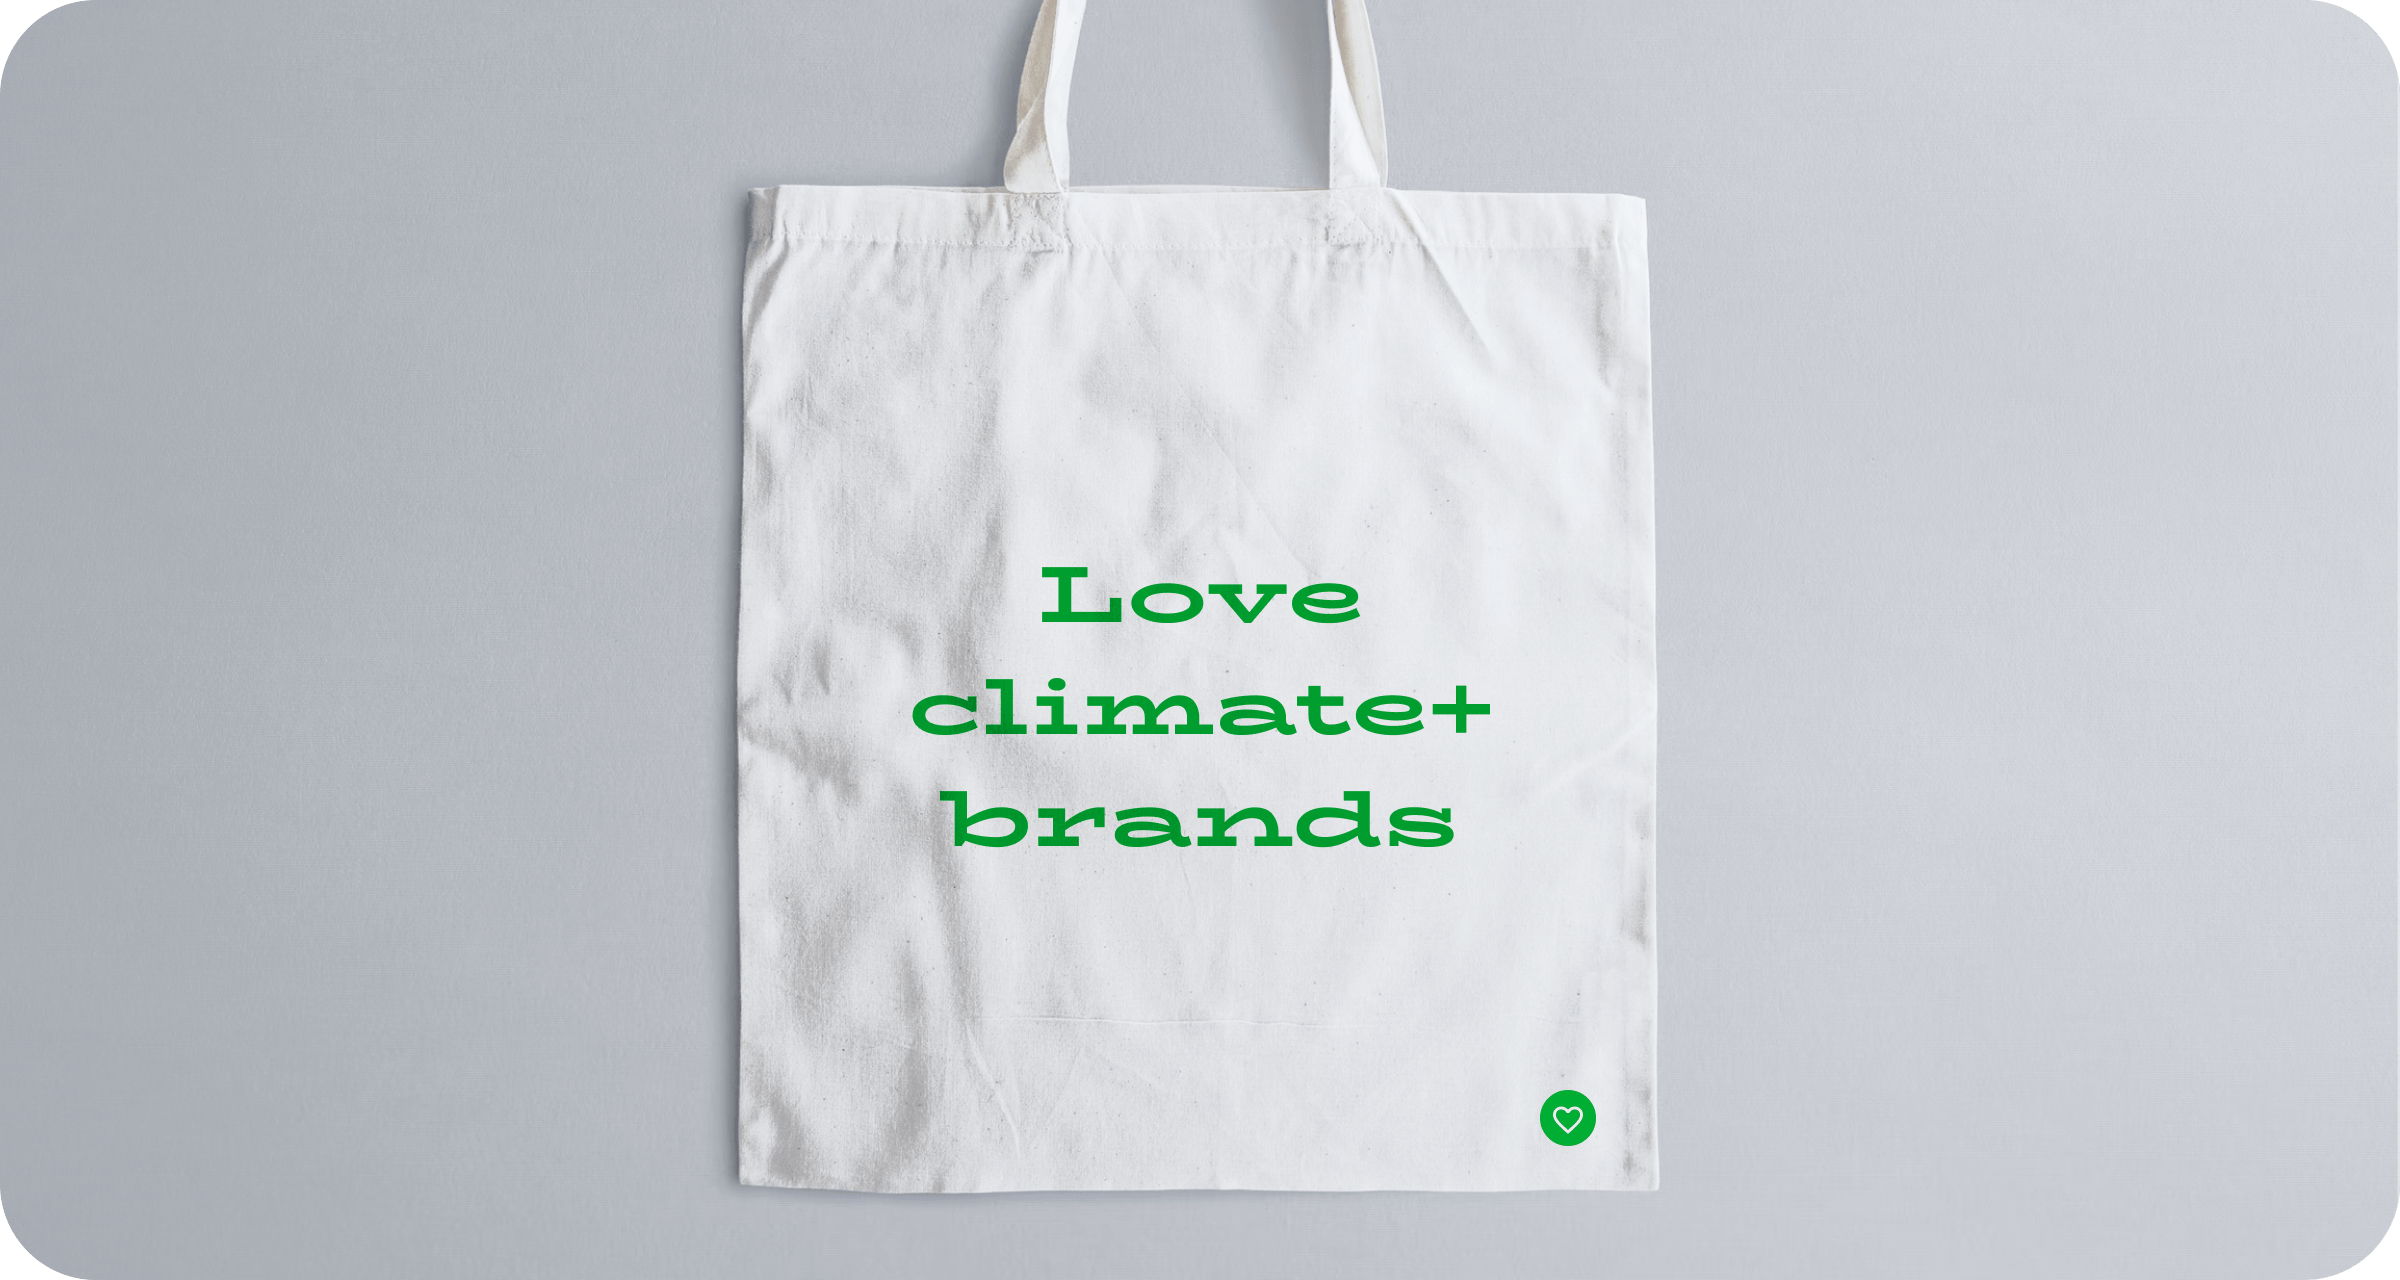 a tote bag reading 'love climate+ brands'